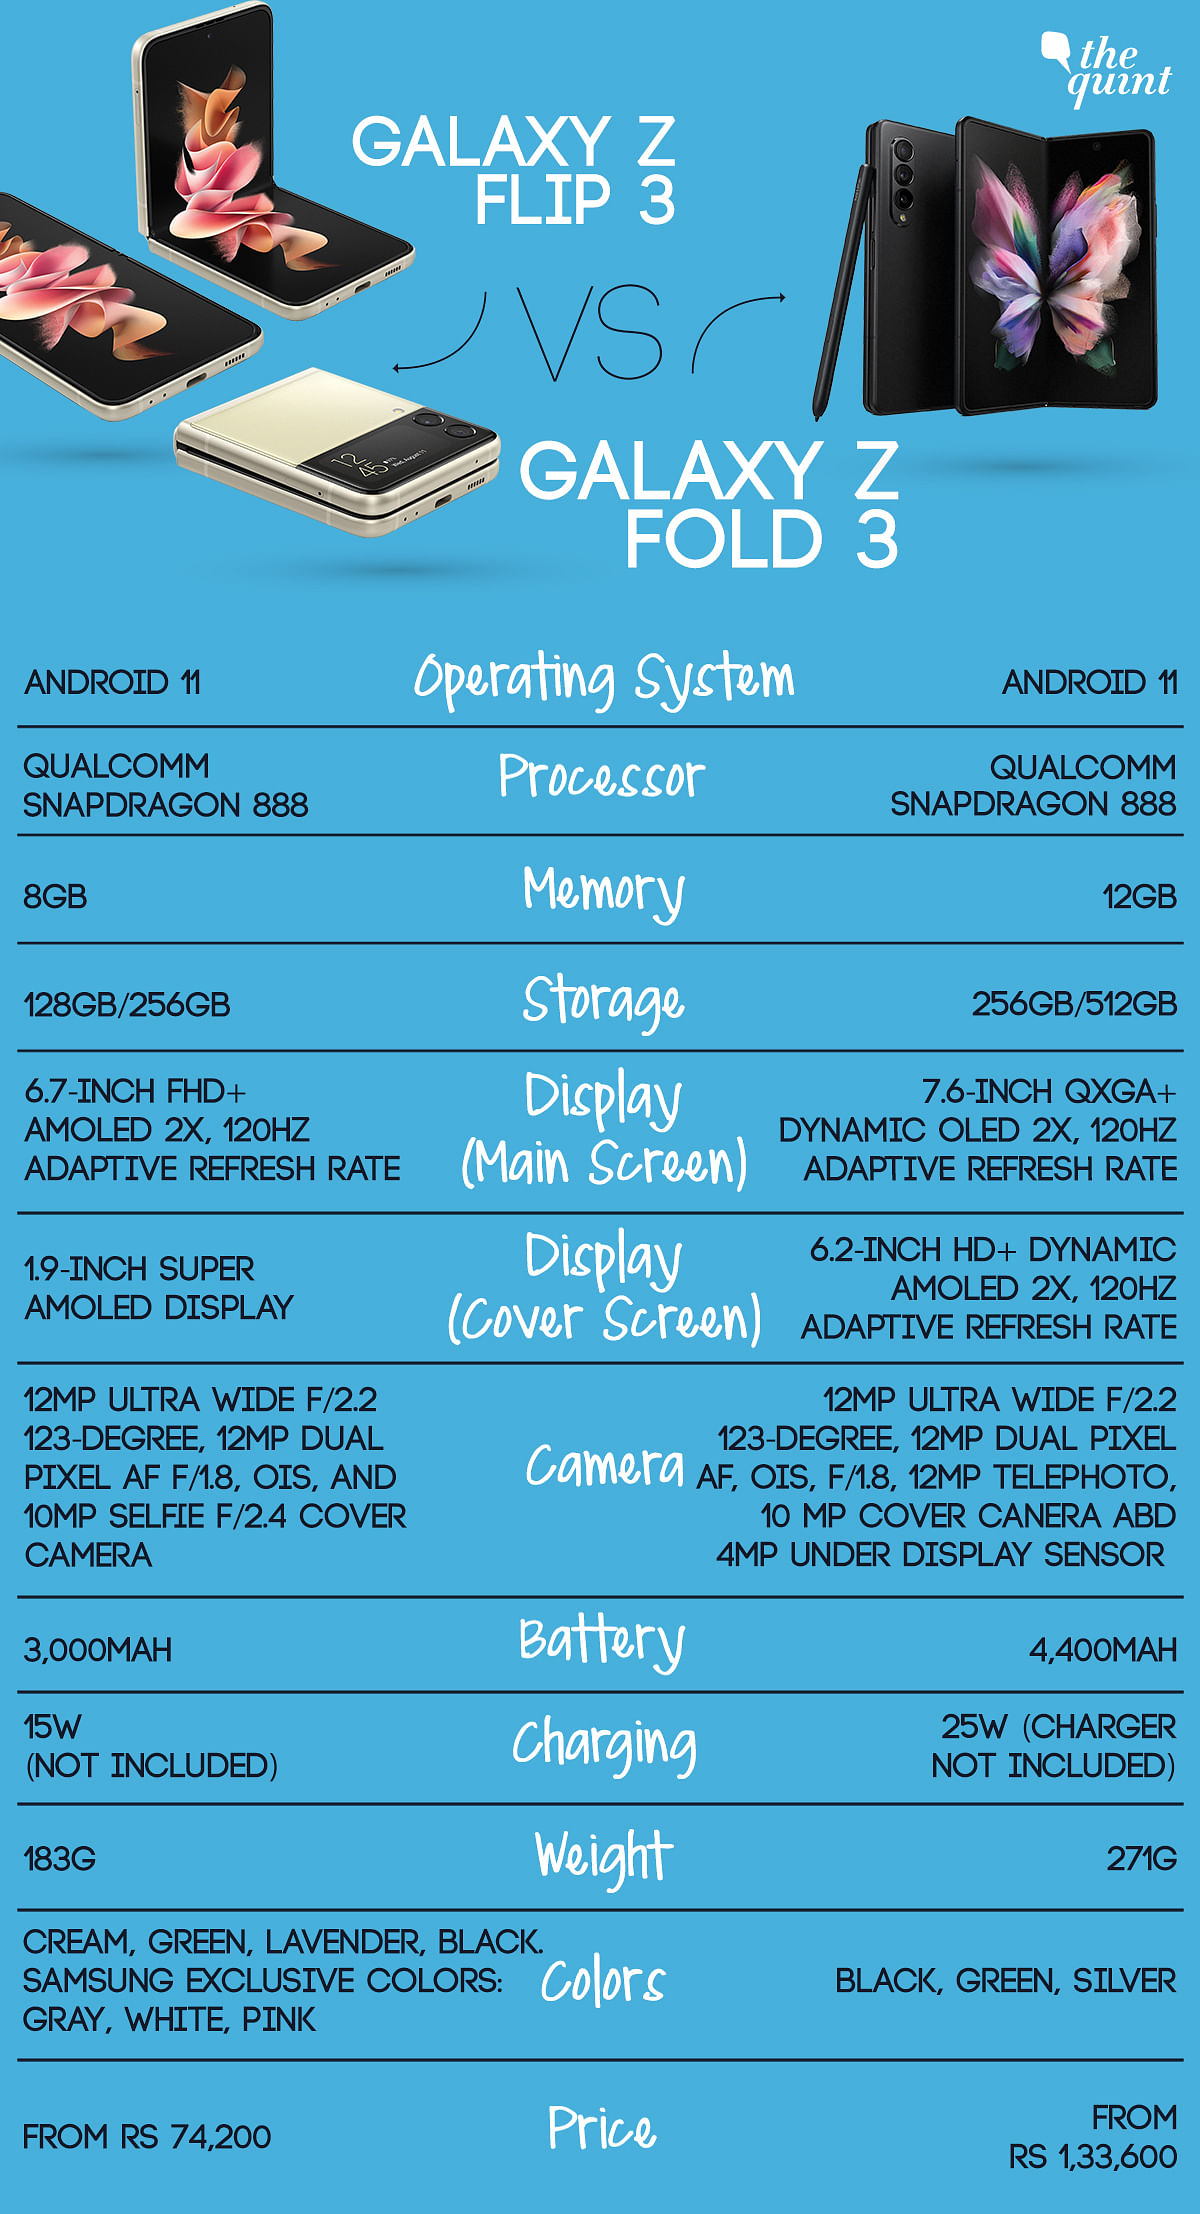 Check out the similarities and differences between the Z Fold 3 and the Z Flip 3 if you're wondering which to buy.